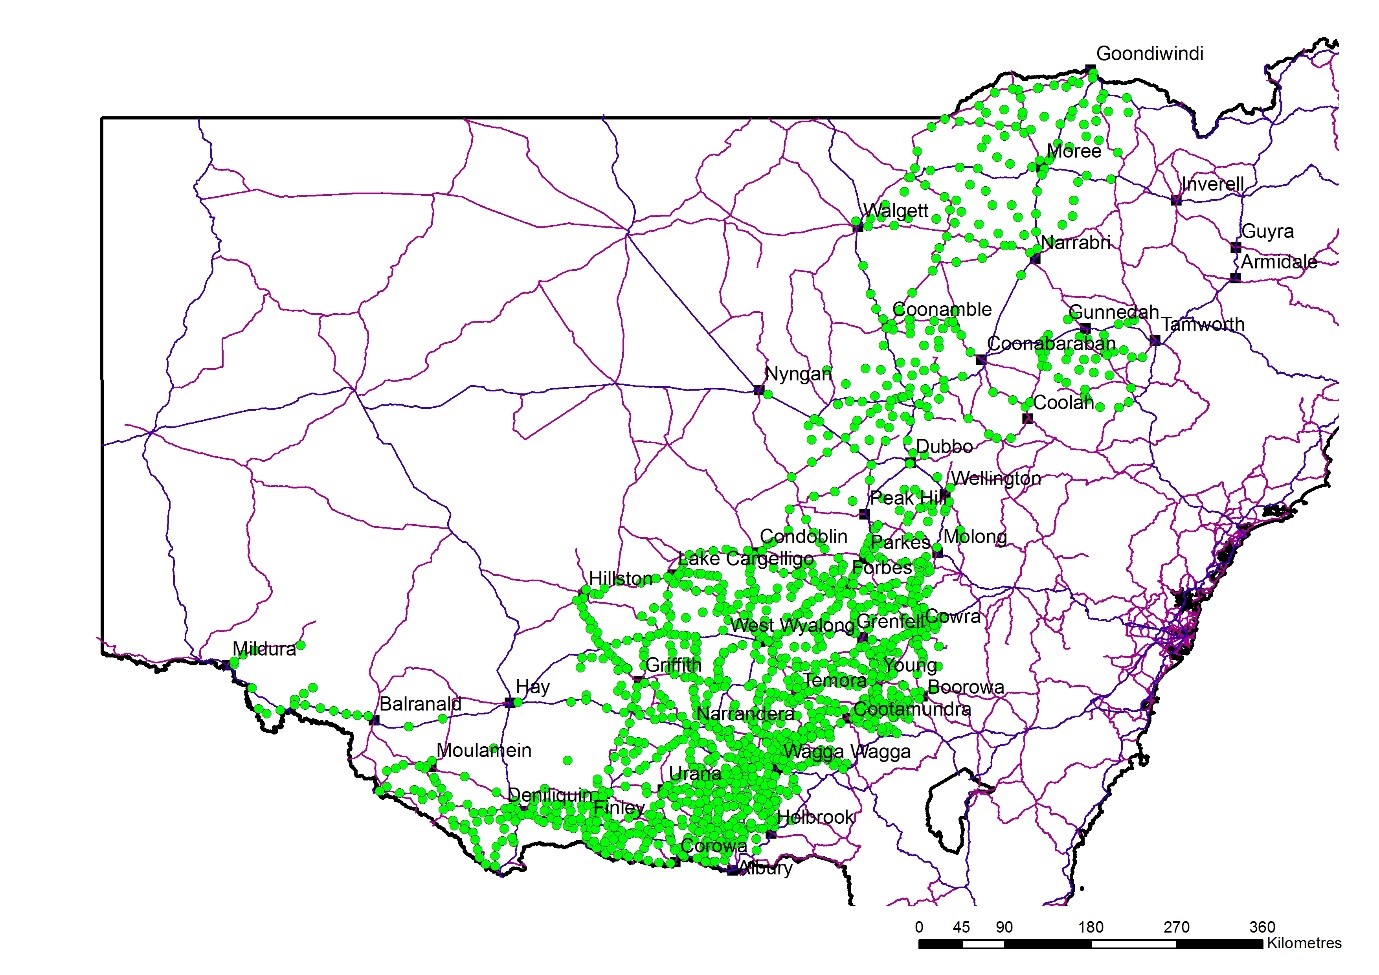 1528 paddocks have been visited across NSW resulting in 939 ryegrass, 777 wild oat, 148 barley grass, 133 brome grass, 356 sow thistle, 76 wild radish and 76 Indian hedge mustard samples being collected. 